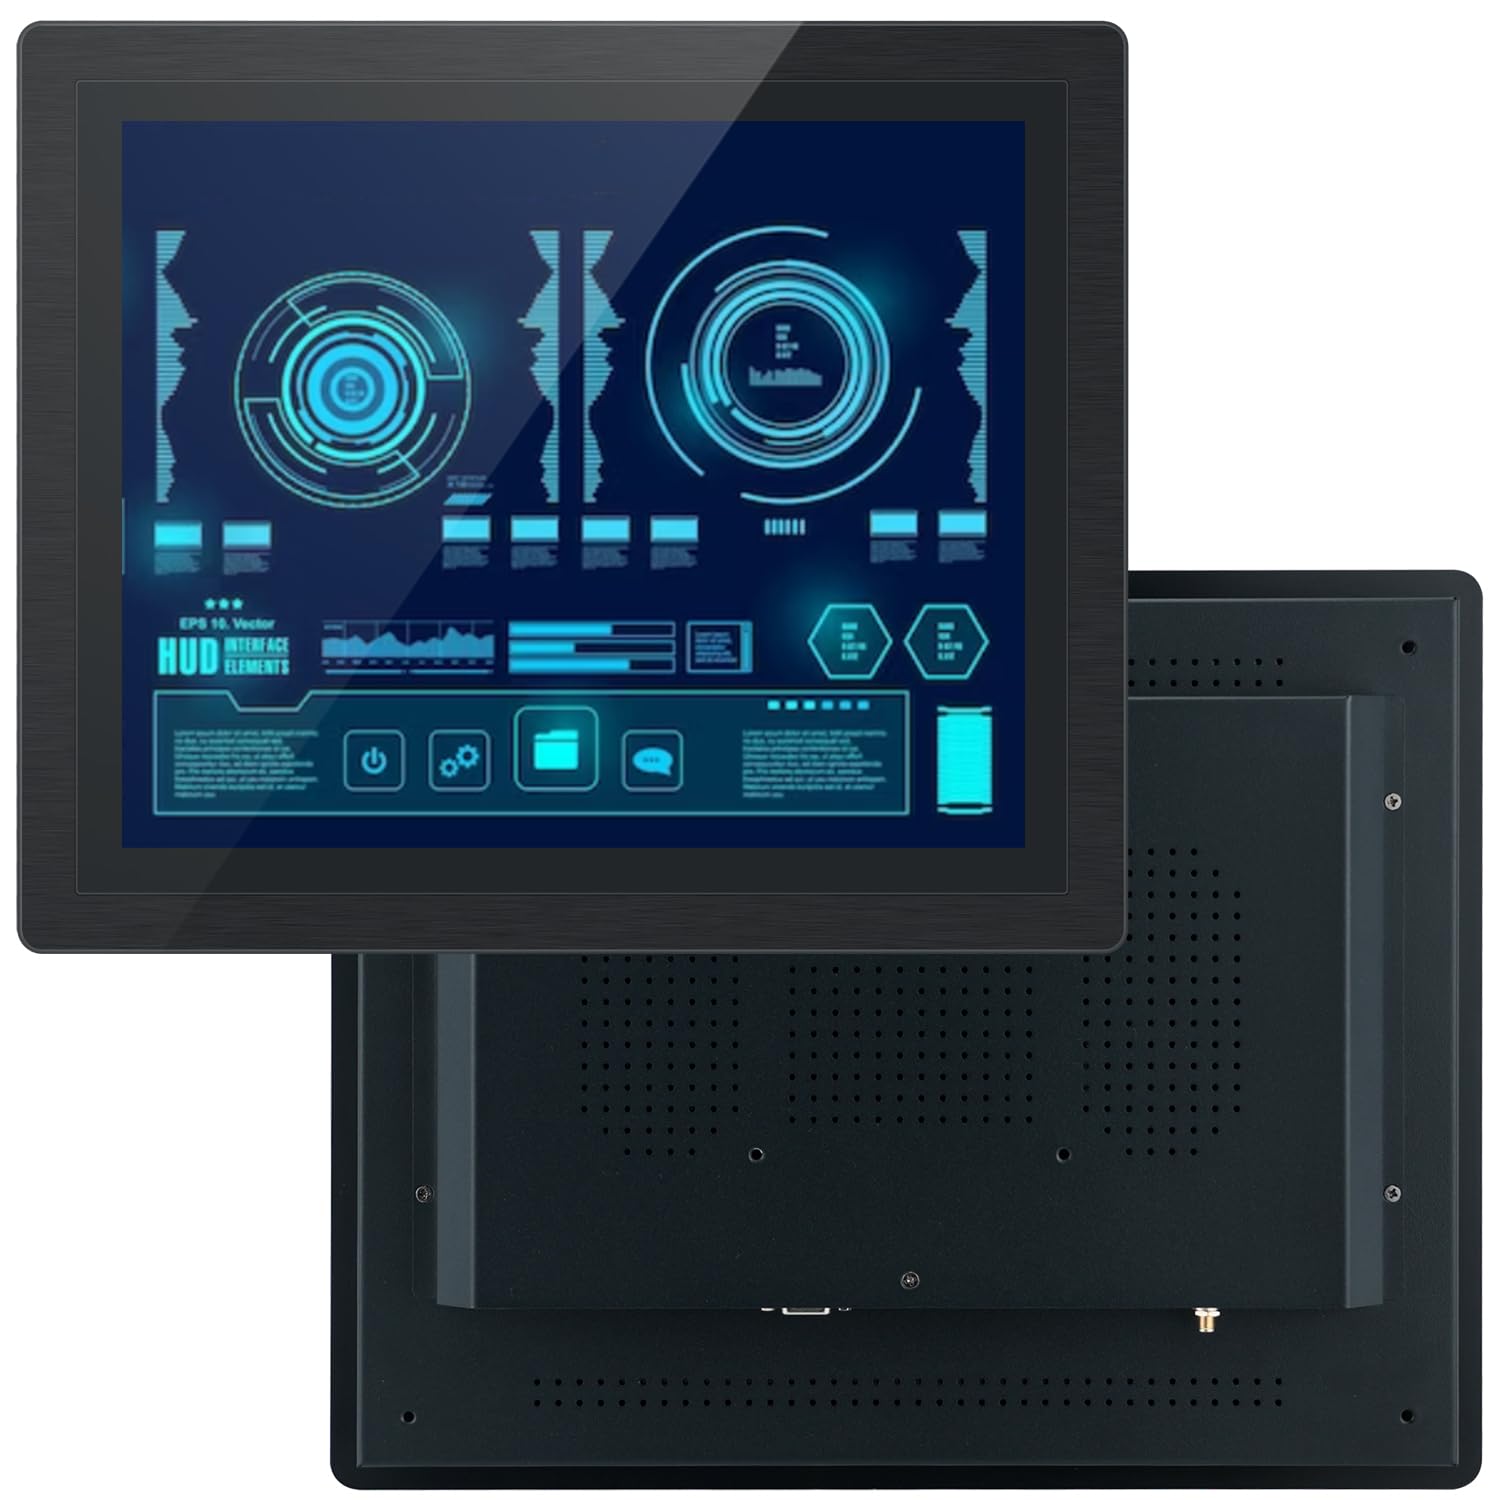 TouchWo 15 inch Industrial Embedded Touch Panel PC, Android All in One Mini PC with Open Frame Capacitive Touchscreen Monitor, RK3568 RAM 4G & ROM 32G Industrial PC Built-in Speakers